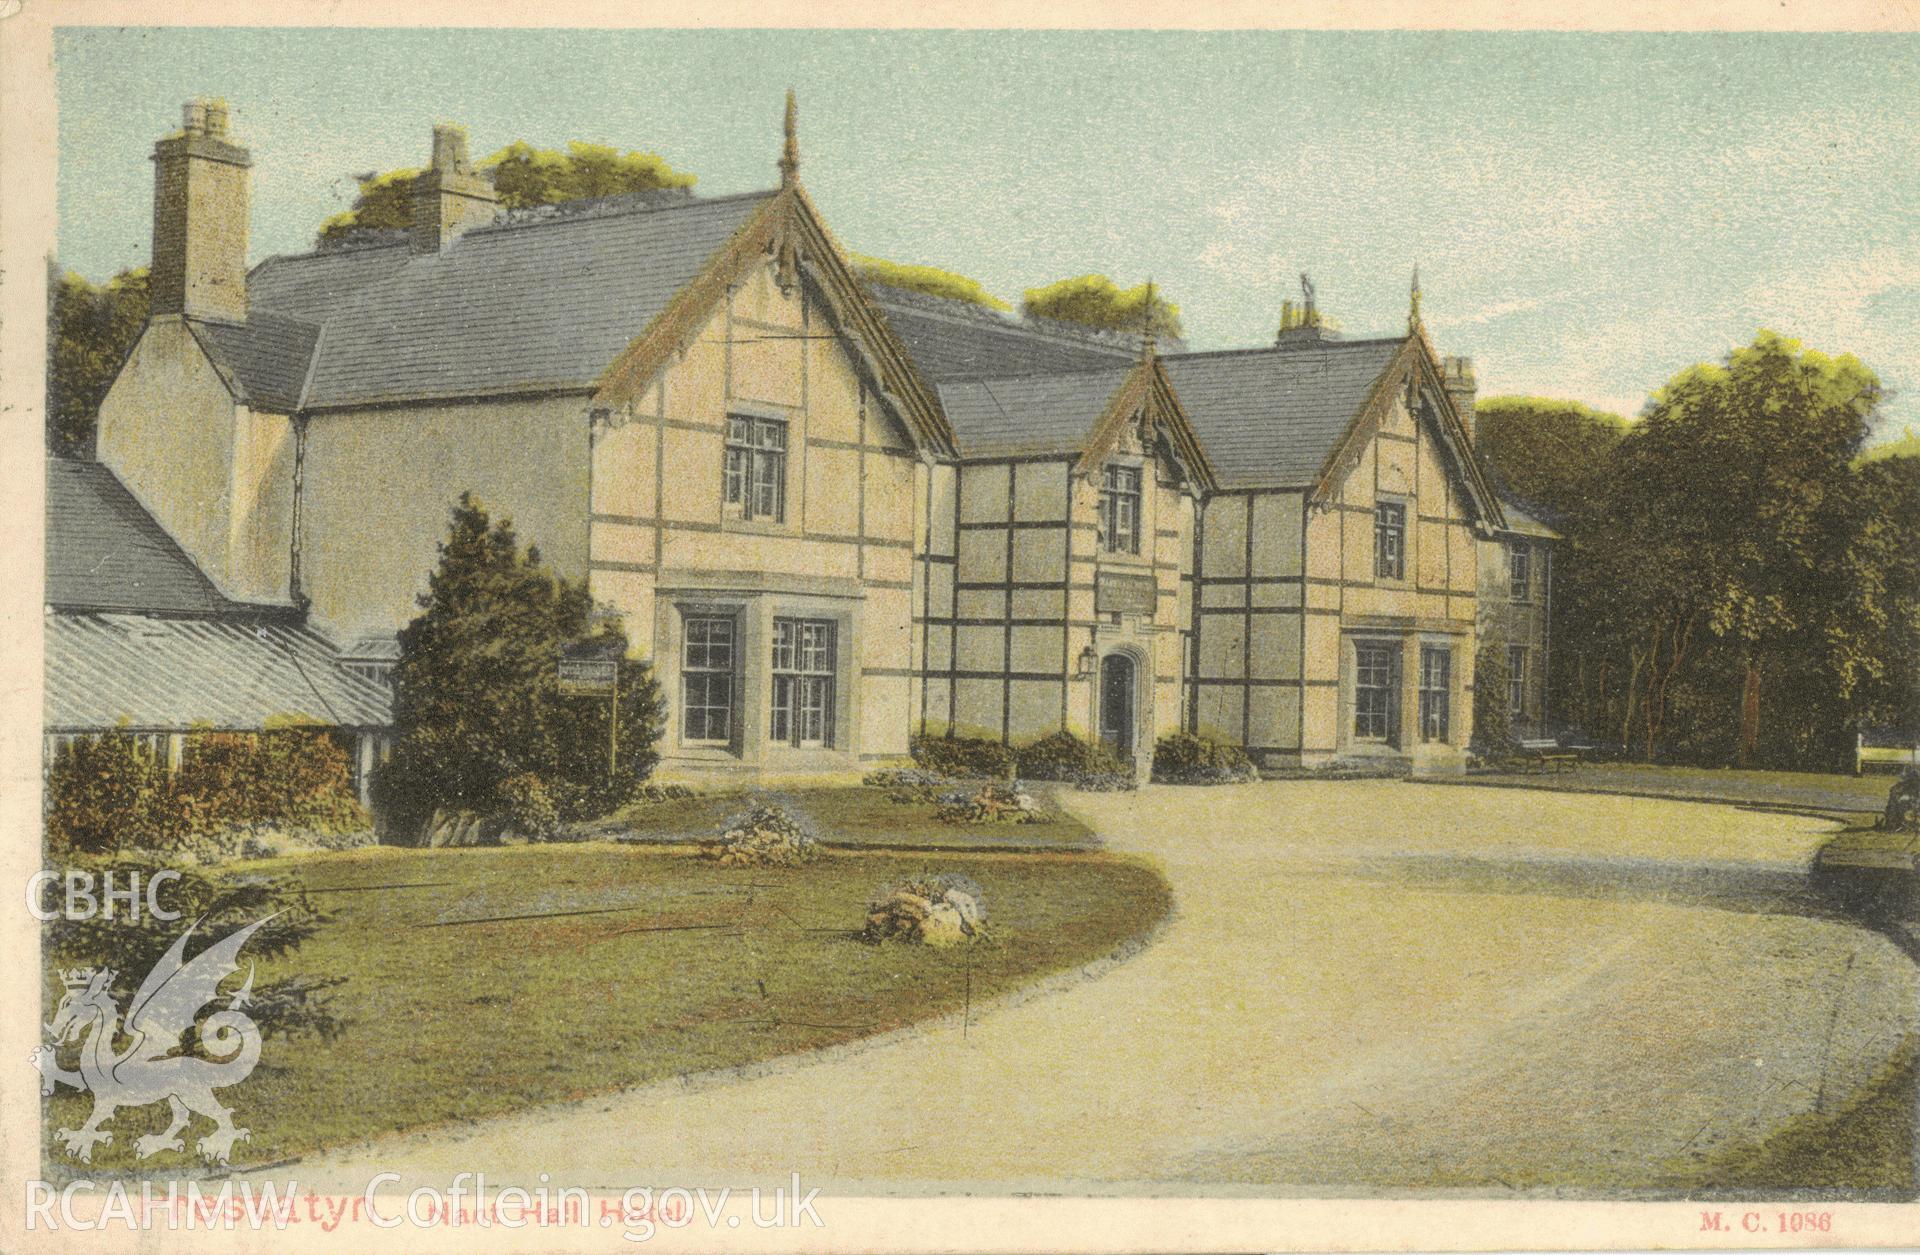 Digitised postcard image of Nant Hall Hotel, Prestatyn, Pictorial Stationery Co. Ltd., London. Produced by Parks and Gardens Data Services, from an original item in the Peter Davis Collection at Parks and Gardens UK. We hold only web-resolution images of this collection, suitable for viewing on screen and for research purposes only. We do not hold the original images, or publication quality scans.